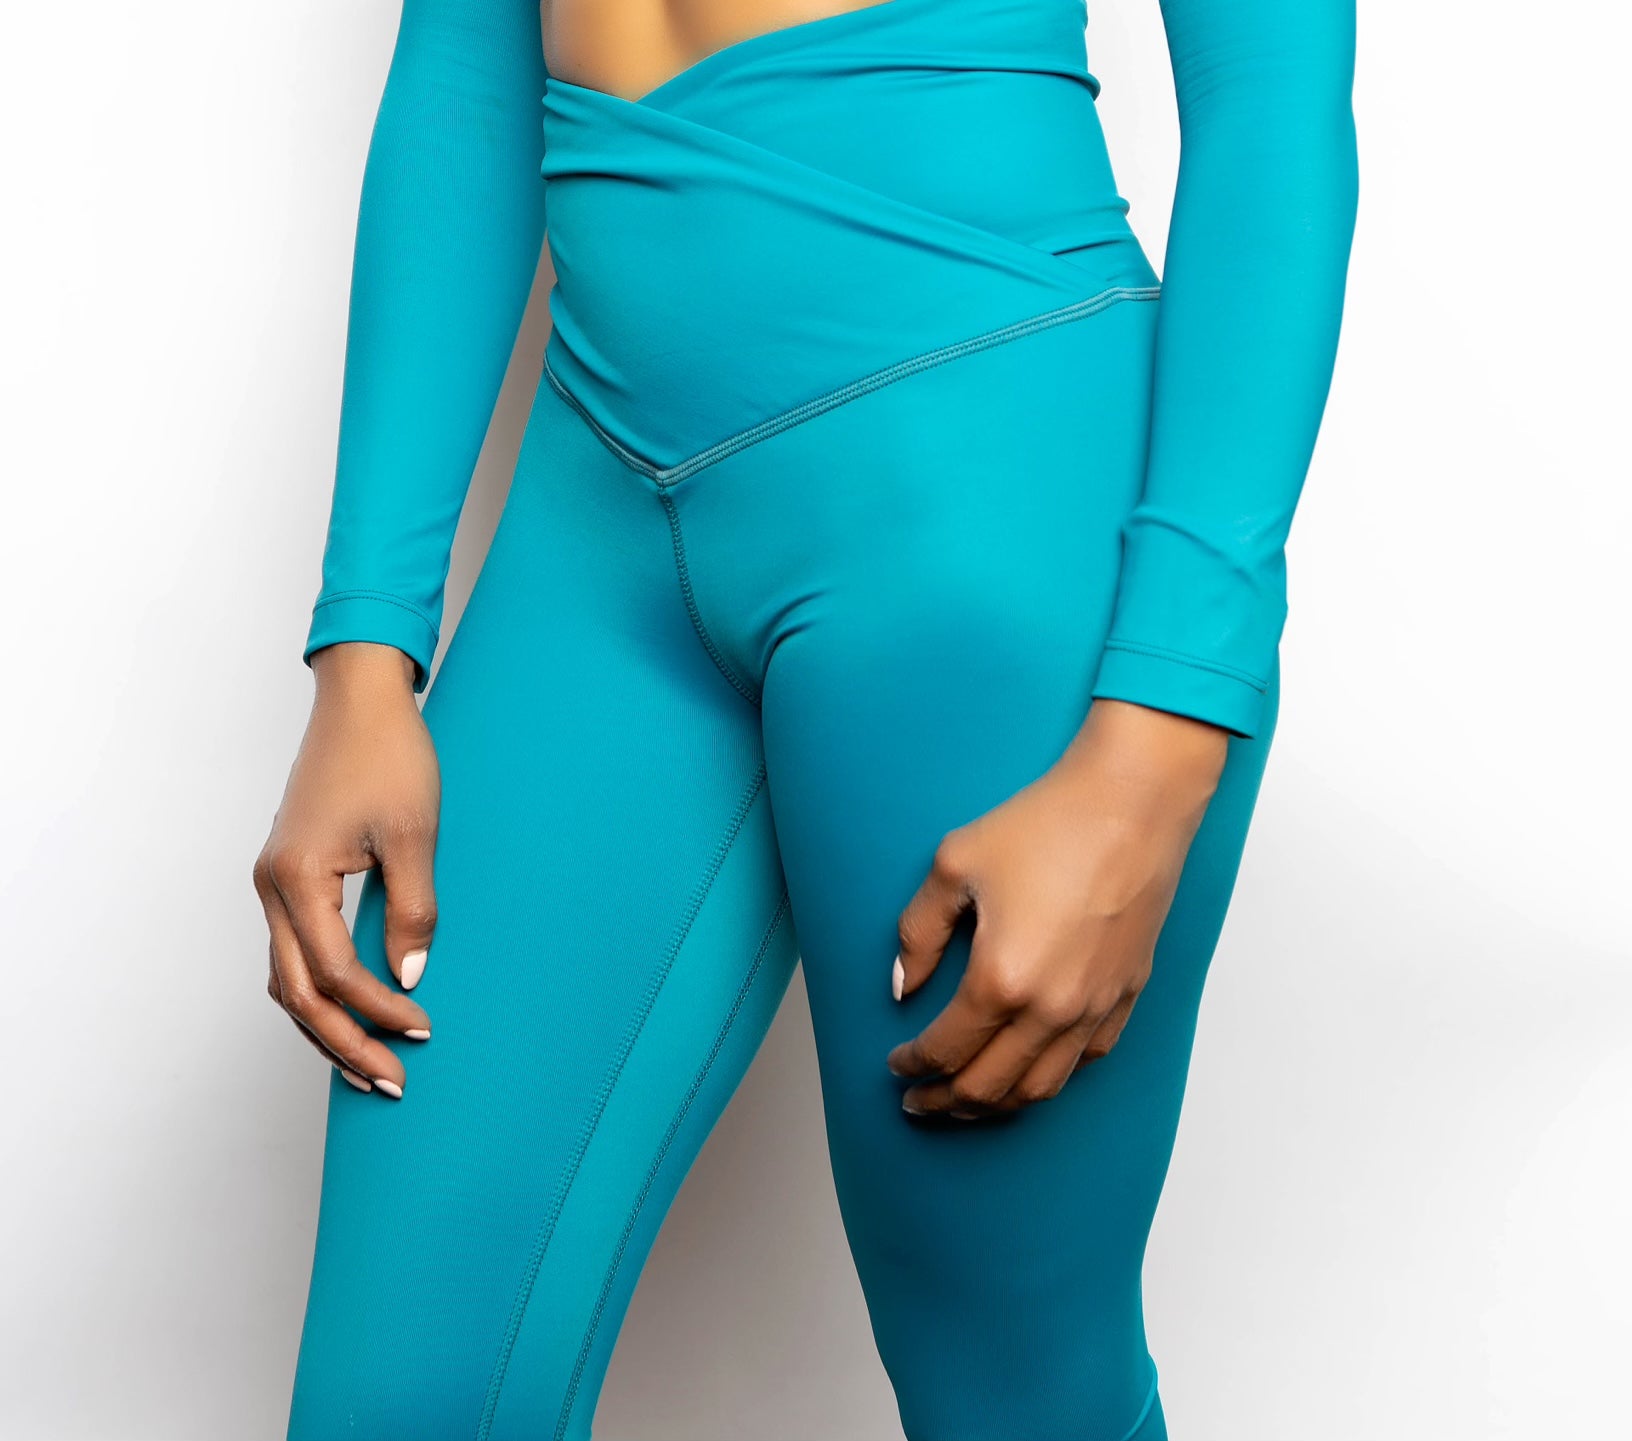 Hearts High waist Legging; Eco-friendly Recycled material